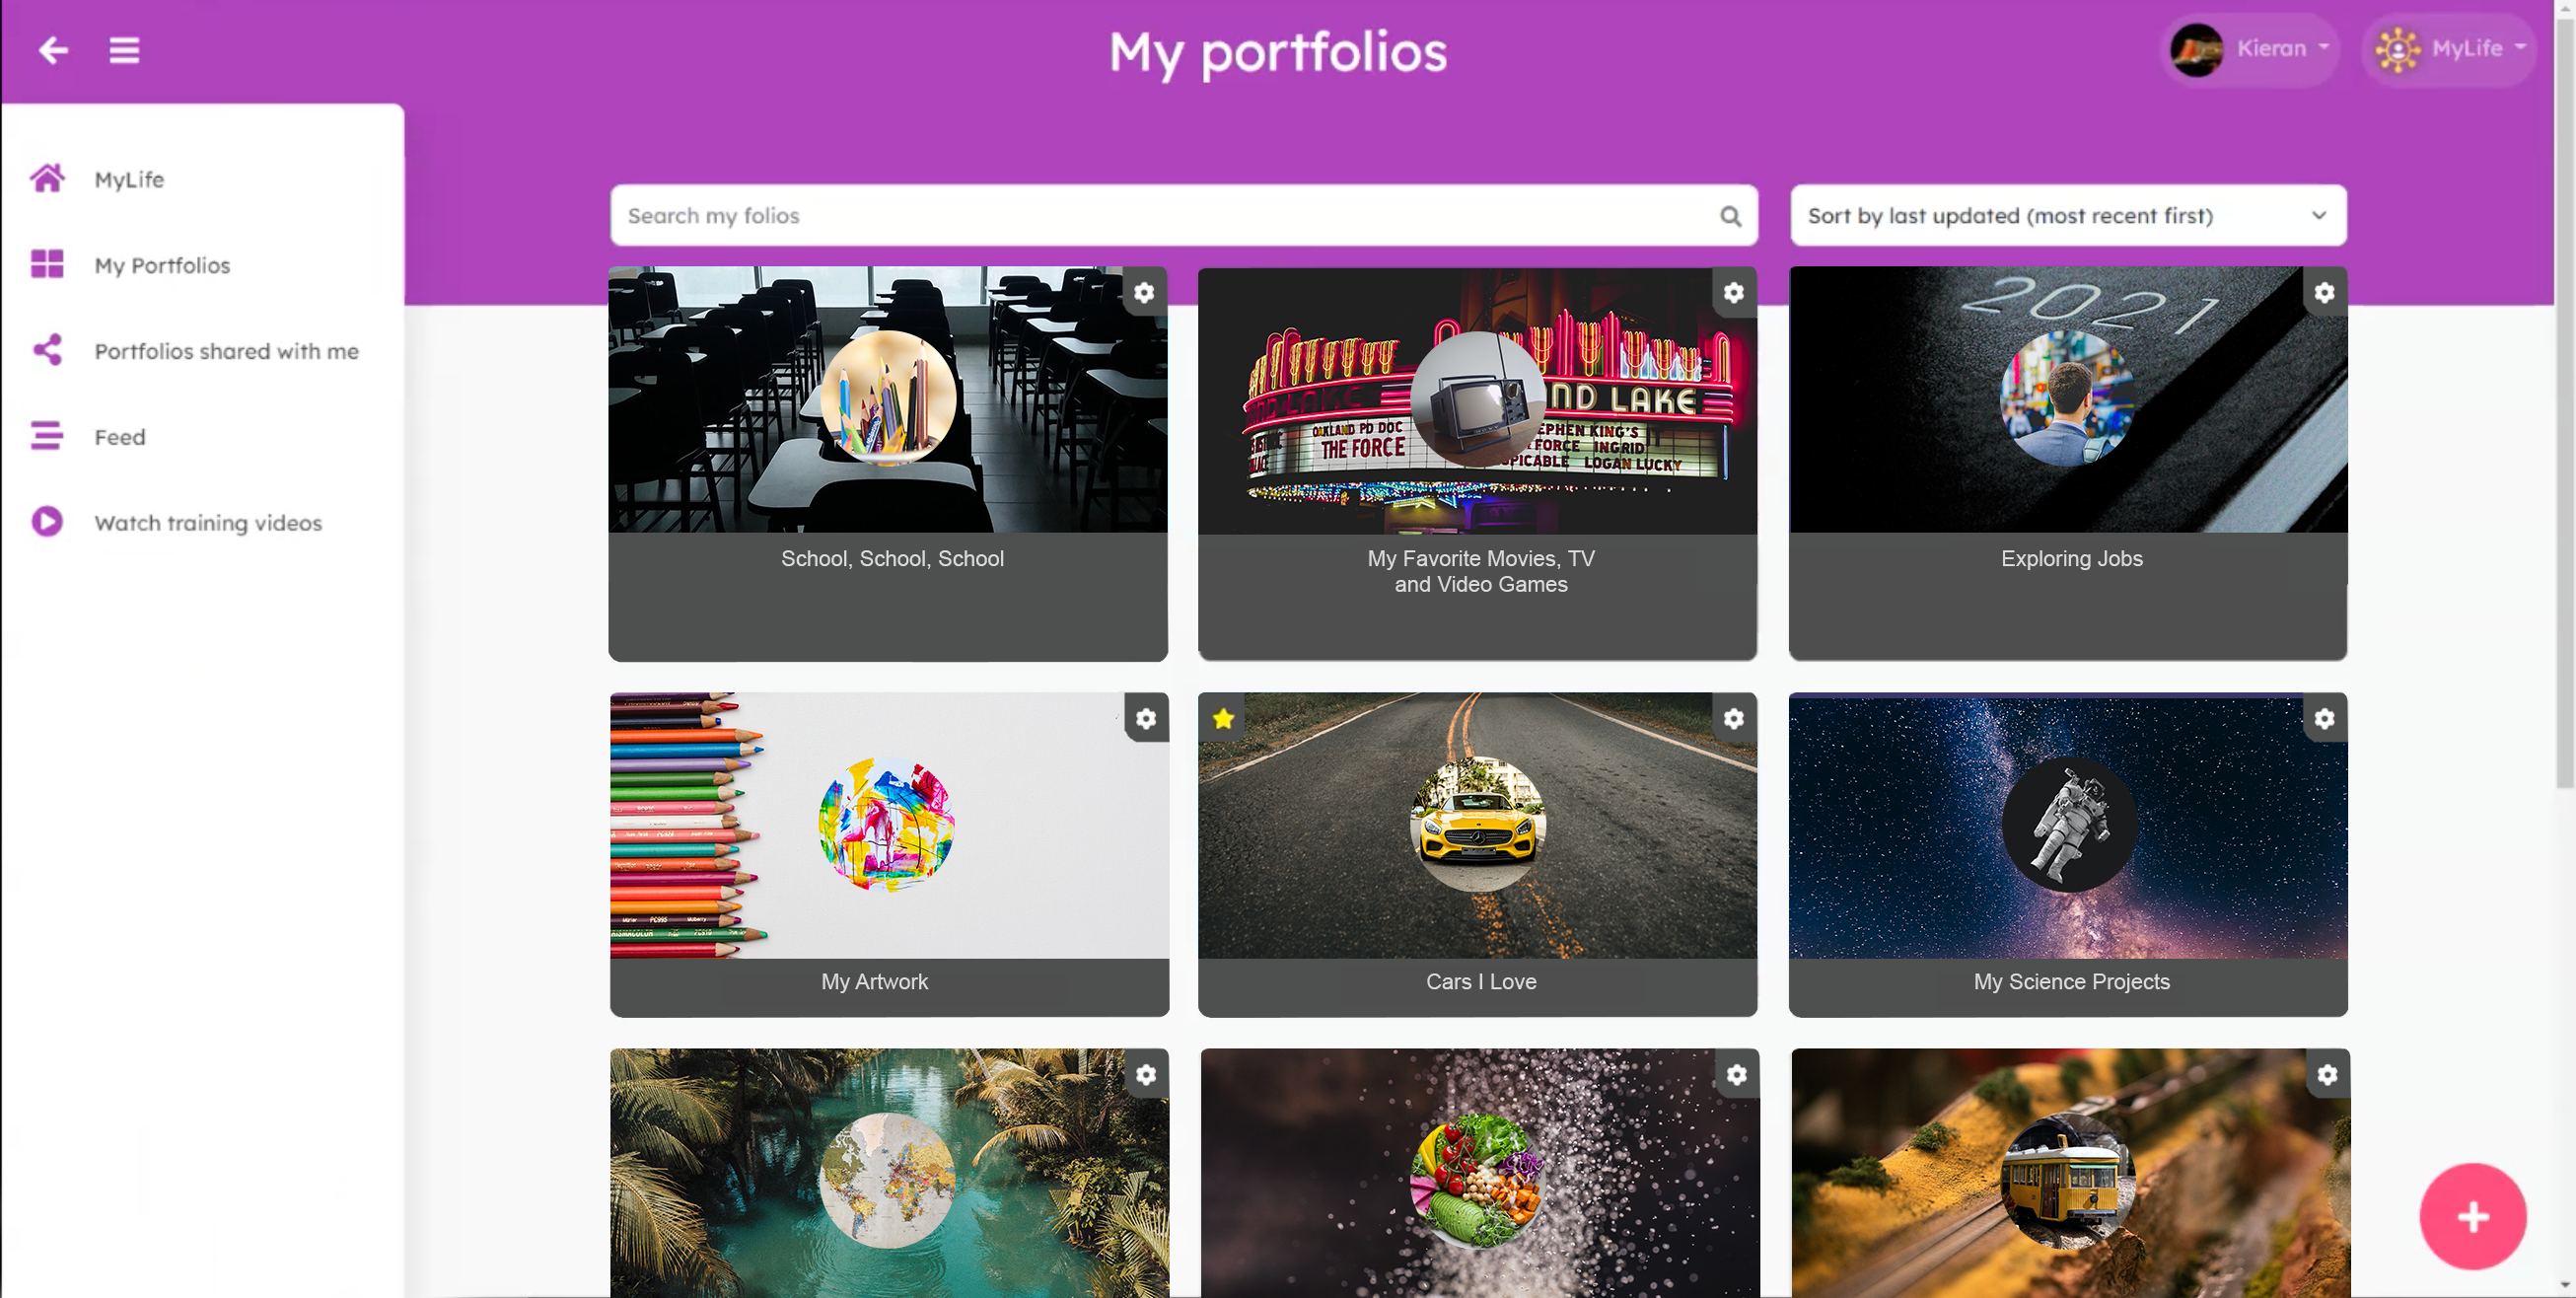 Image shows New, visual navigation of portfolios with ability to flag (yellow star) any portfolio as the default.